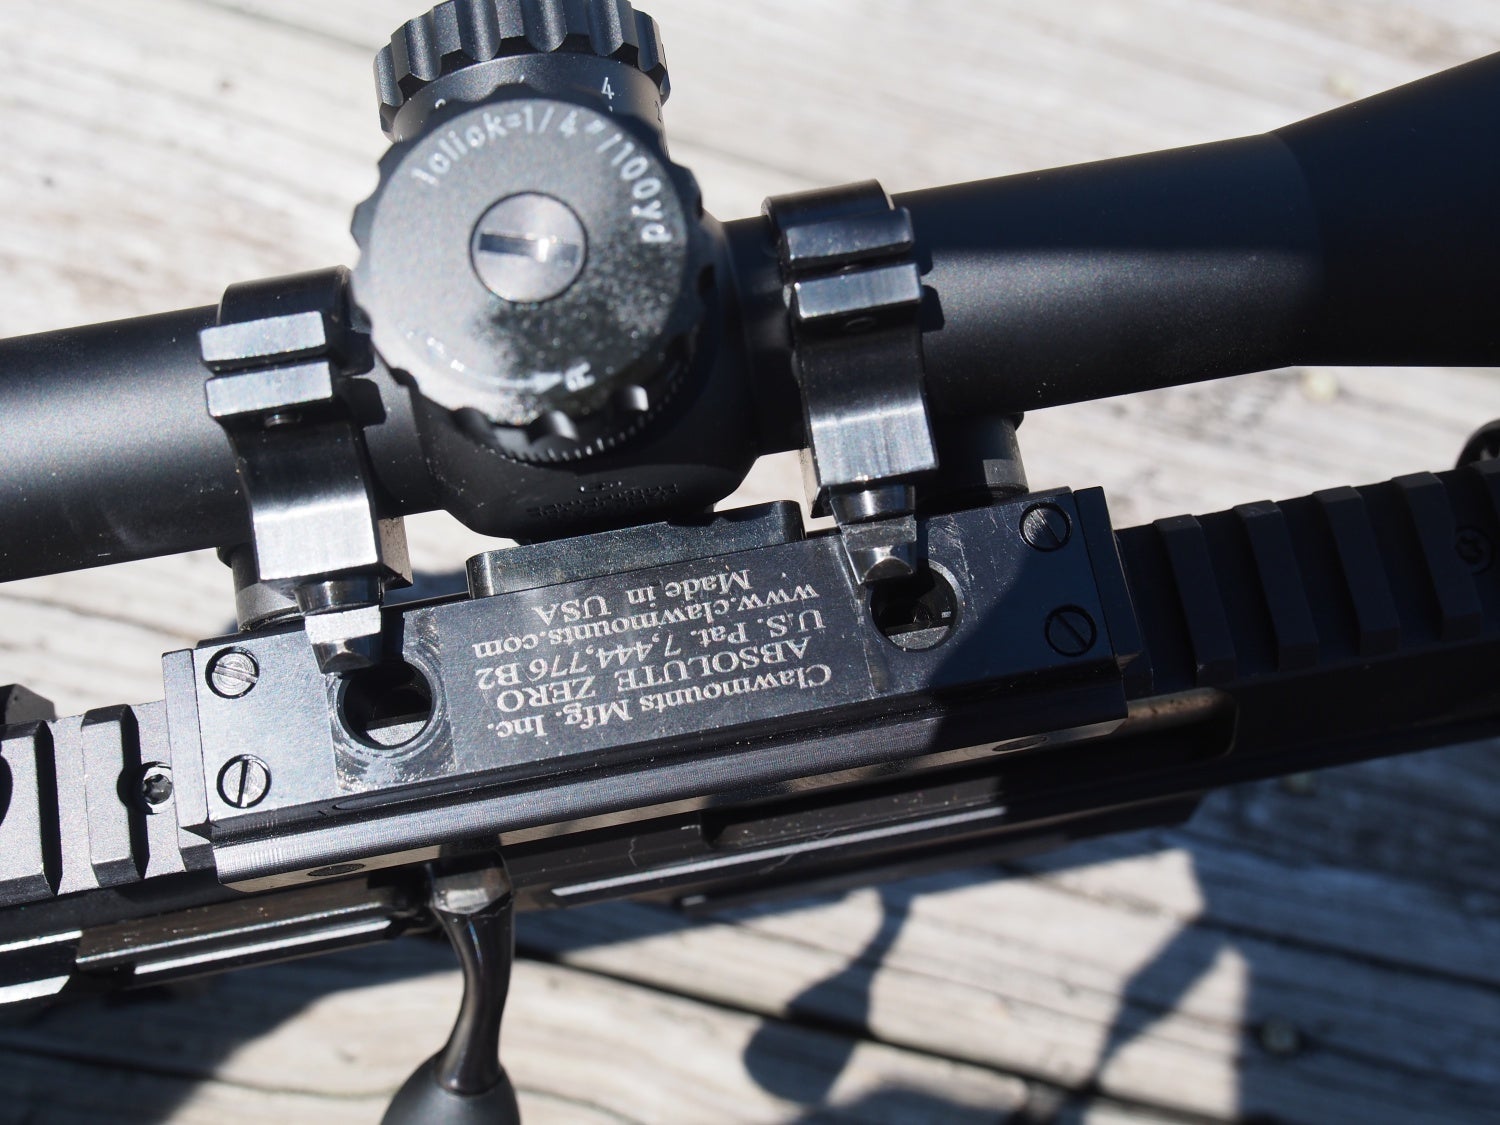 Note the "claws on the scope ring base and corresponding" Claws" inside the upper mount base.